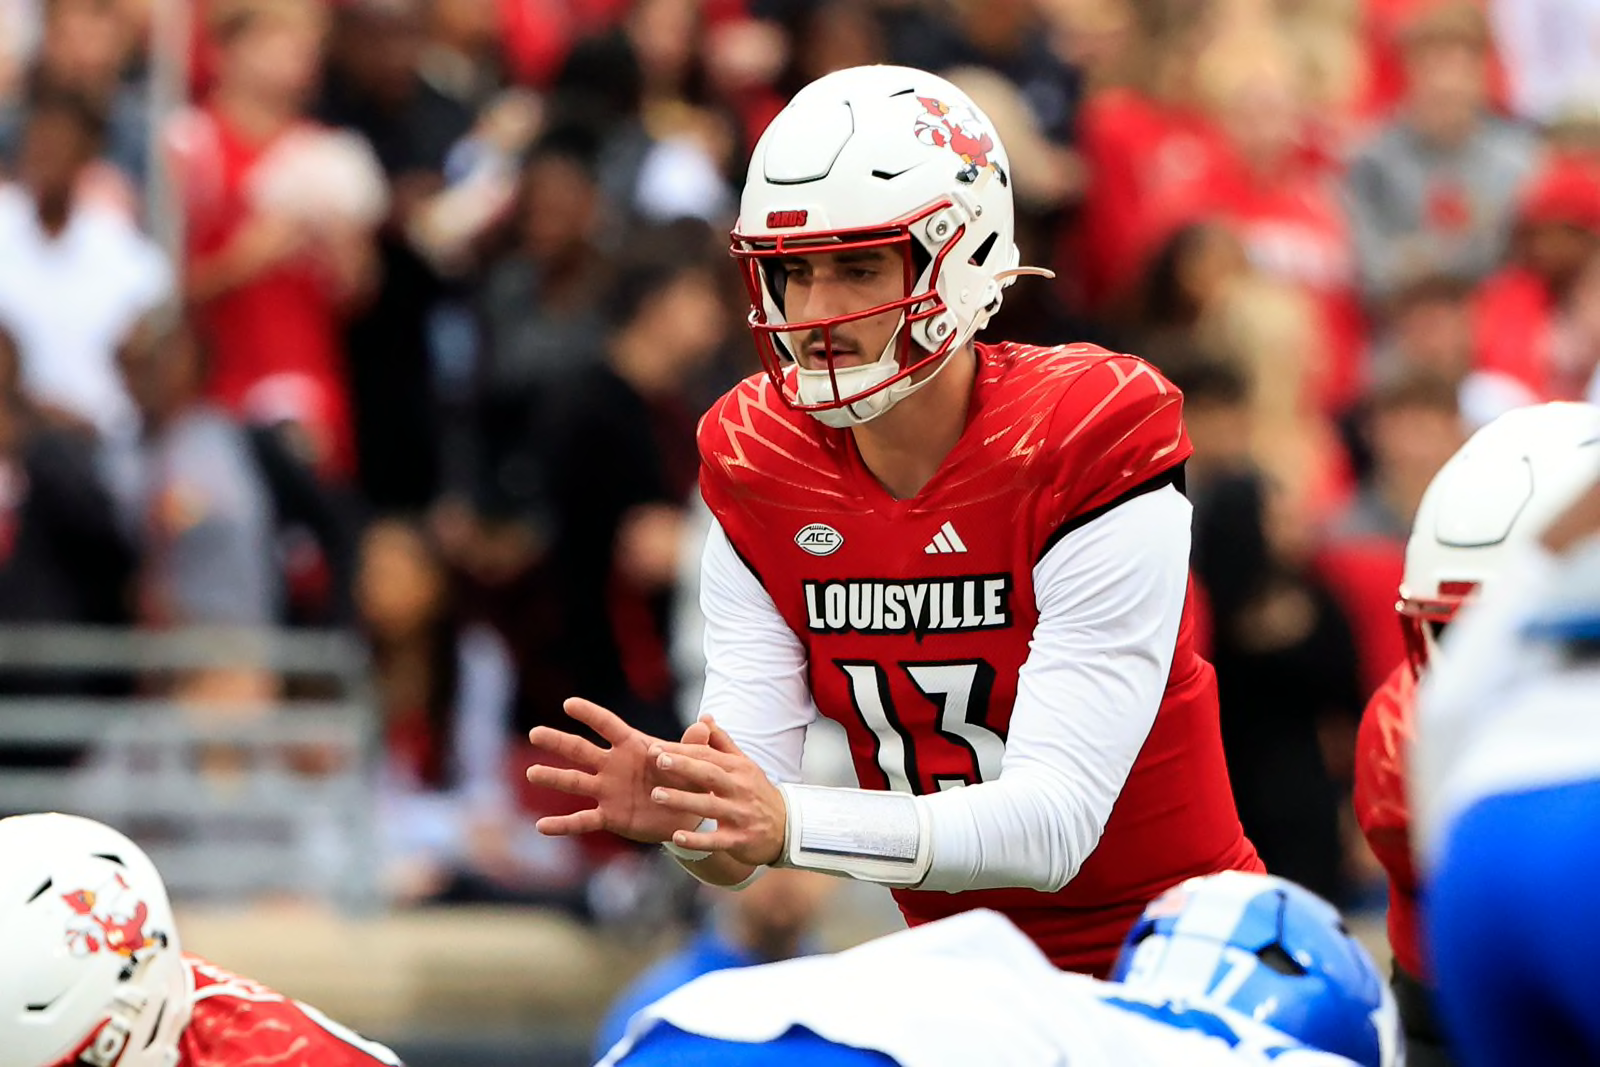 Louisville Cardinals Unveil New Uniforms Ahead Of Chick-fil-A Kickoff Game  – SportsLogos.Net News